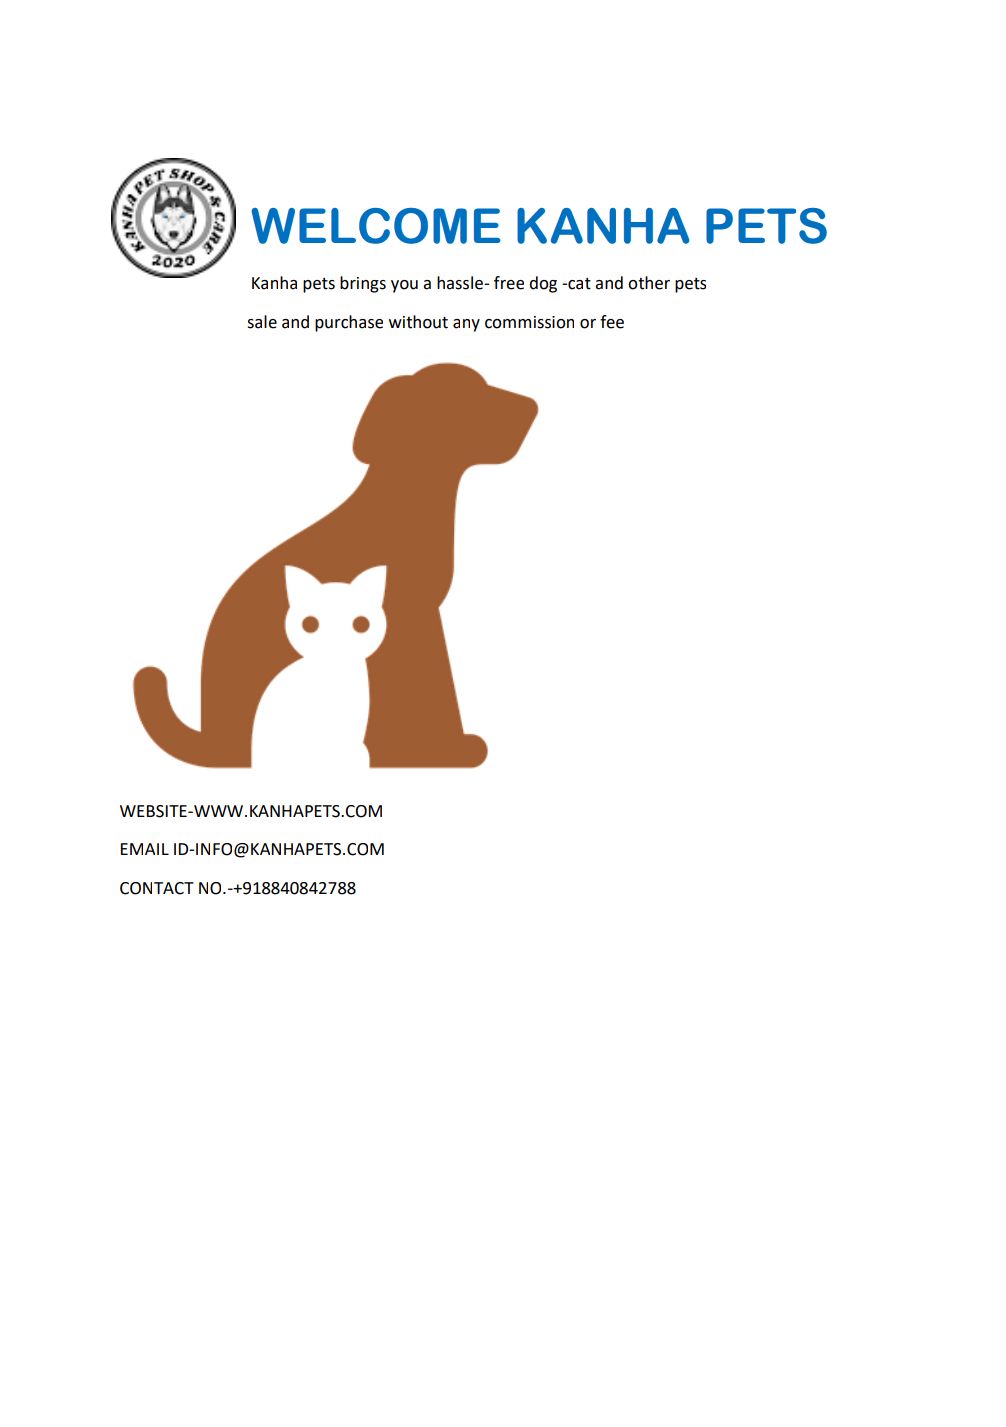 Pet care; Exp: More than 10 year